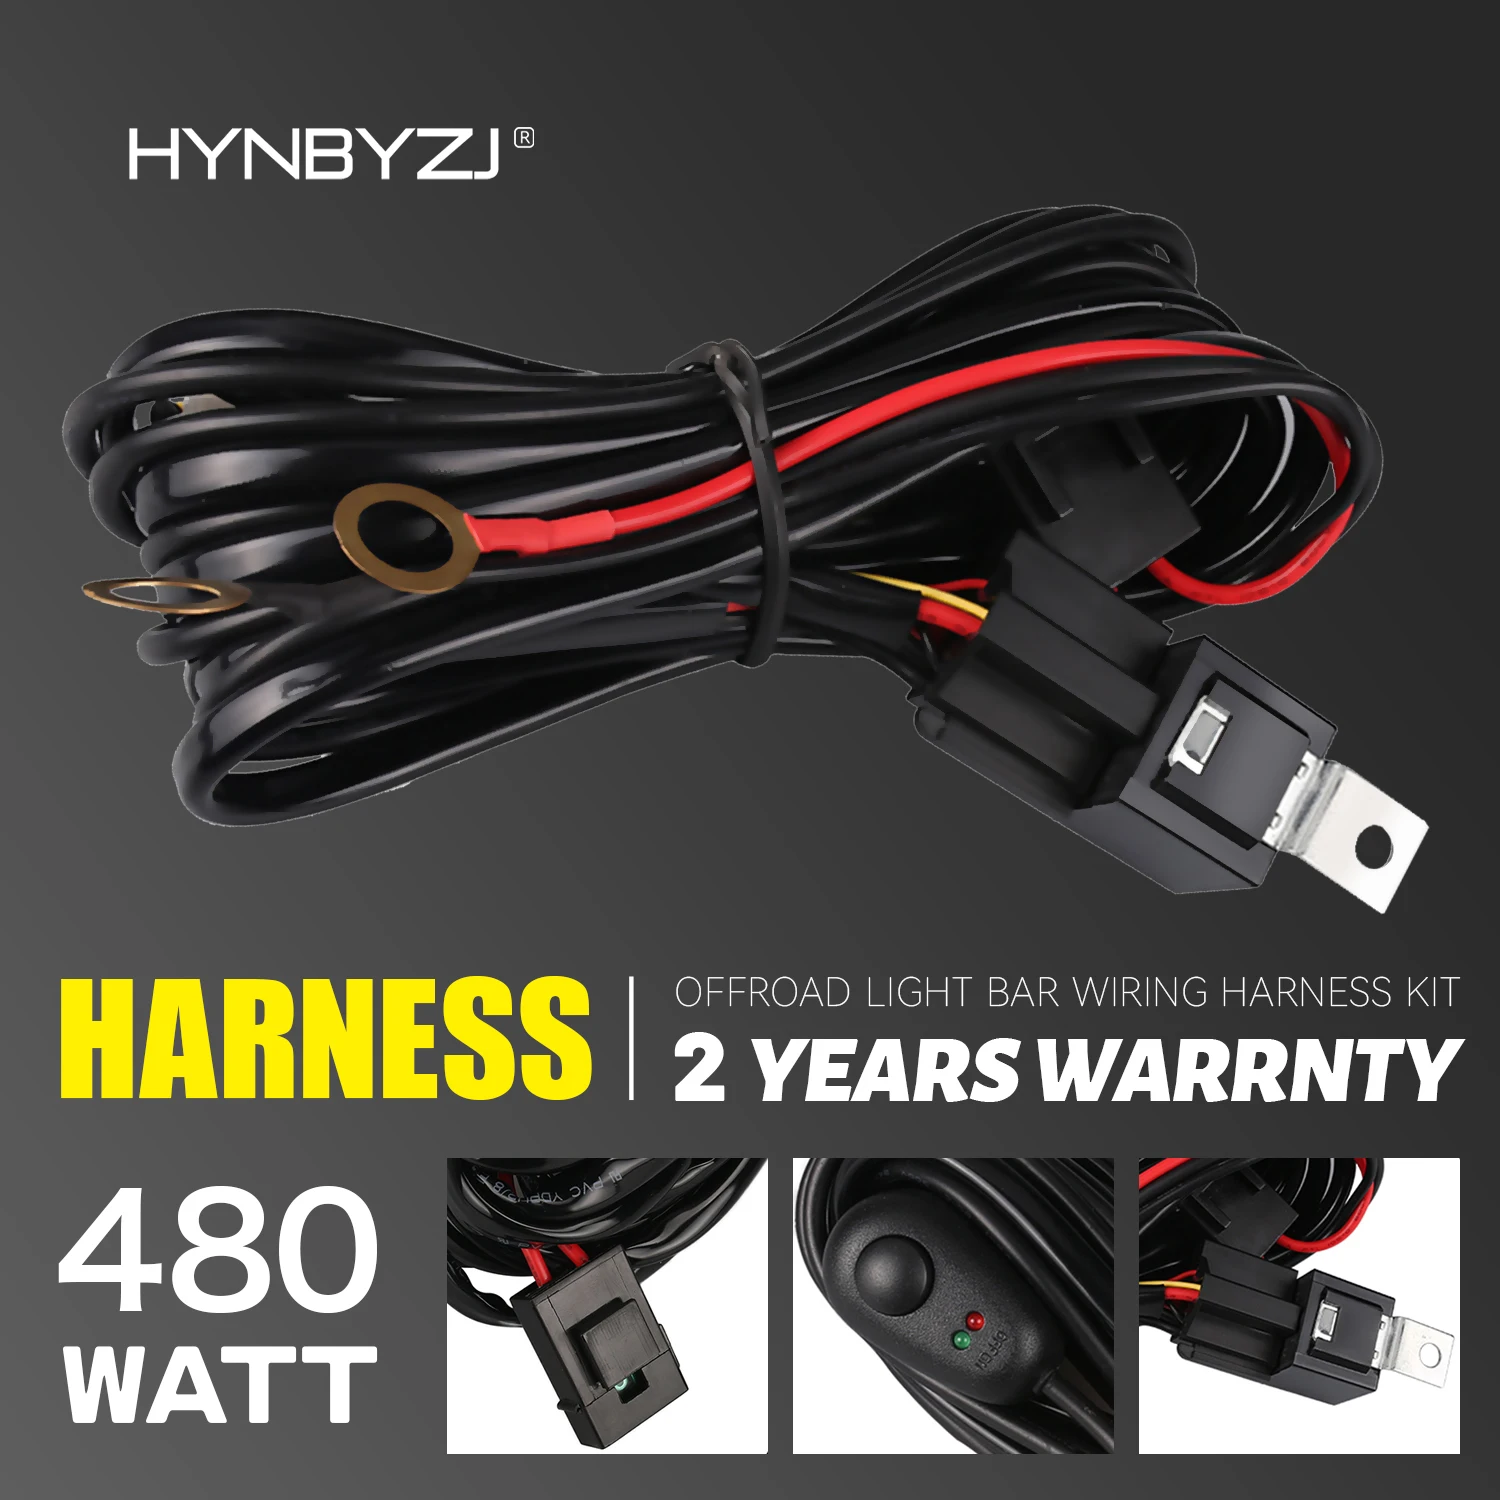 

HYNBYZJ Car LED Light Bar Wire 2.5M 12V 24V 40A Wiring Harness Relay Loom Cable Kit Fuse for Auto Driving Offroad Led Work Lamp